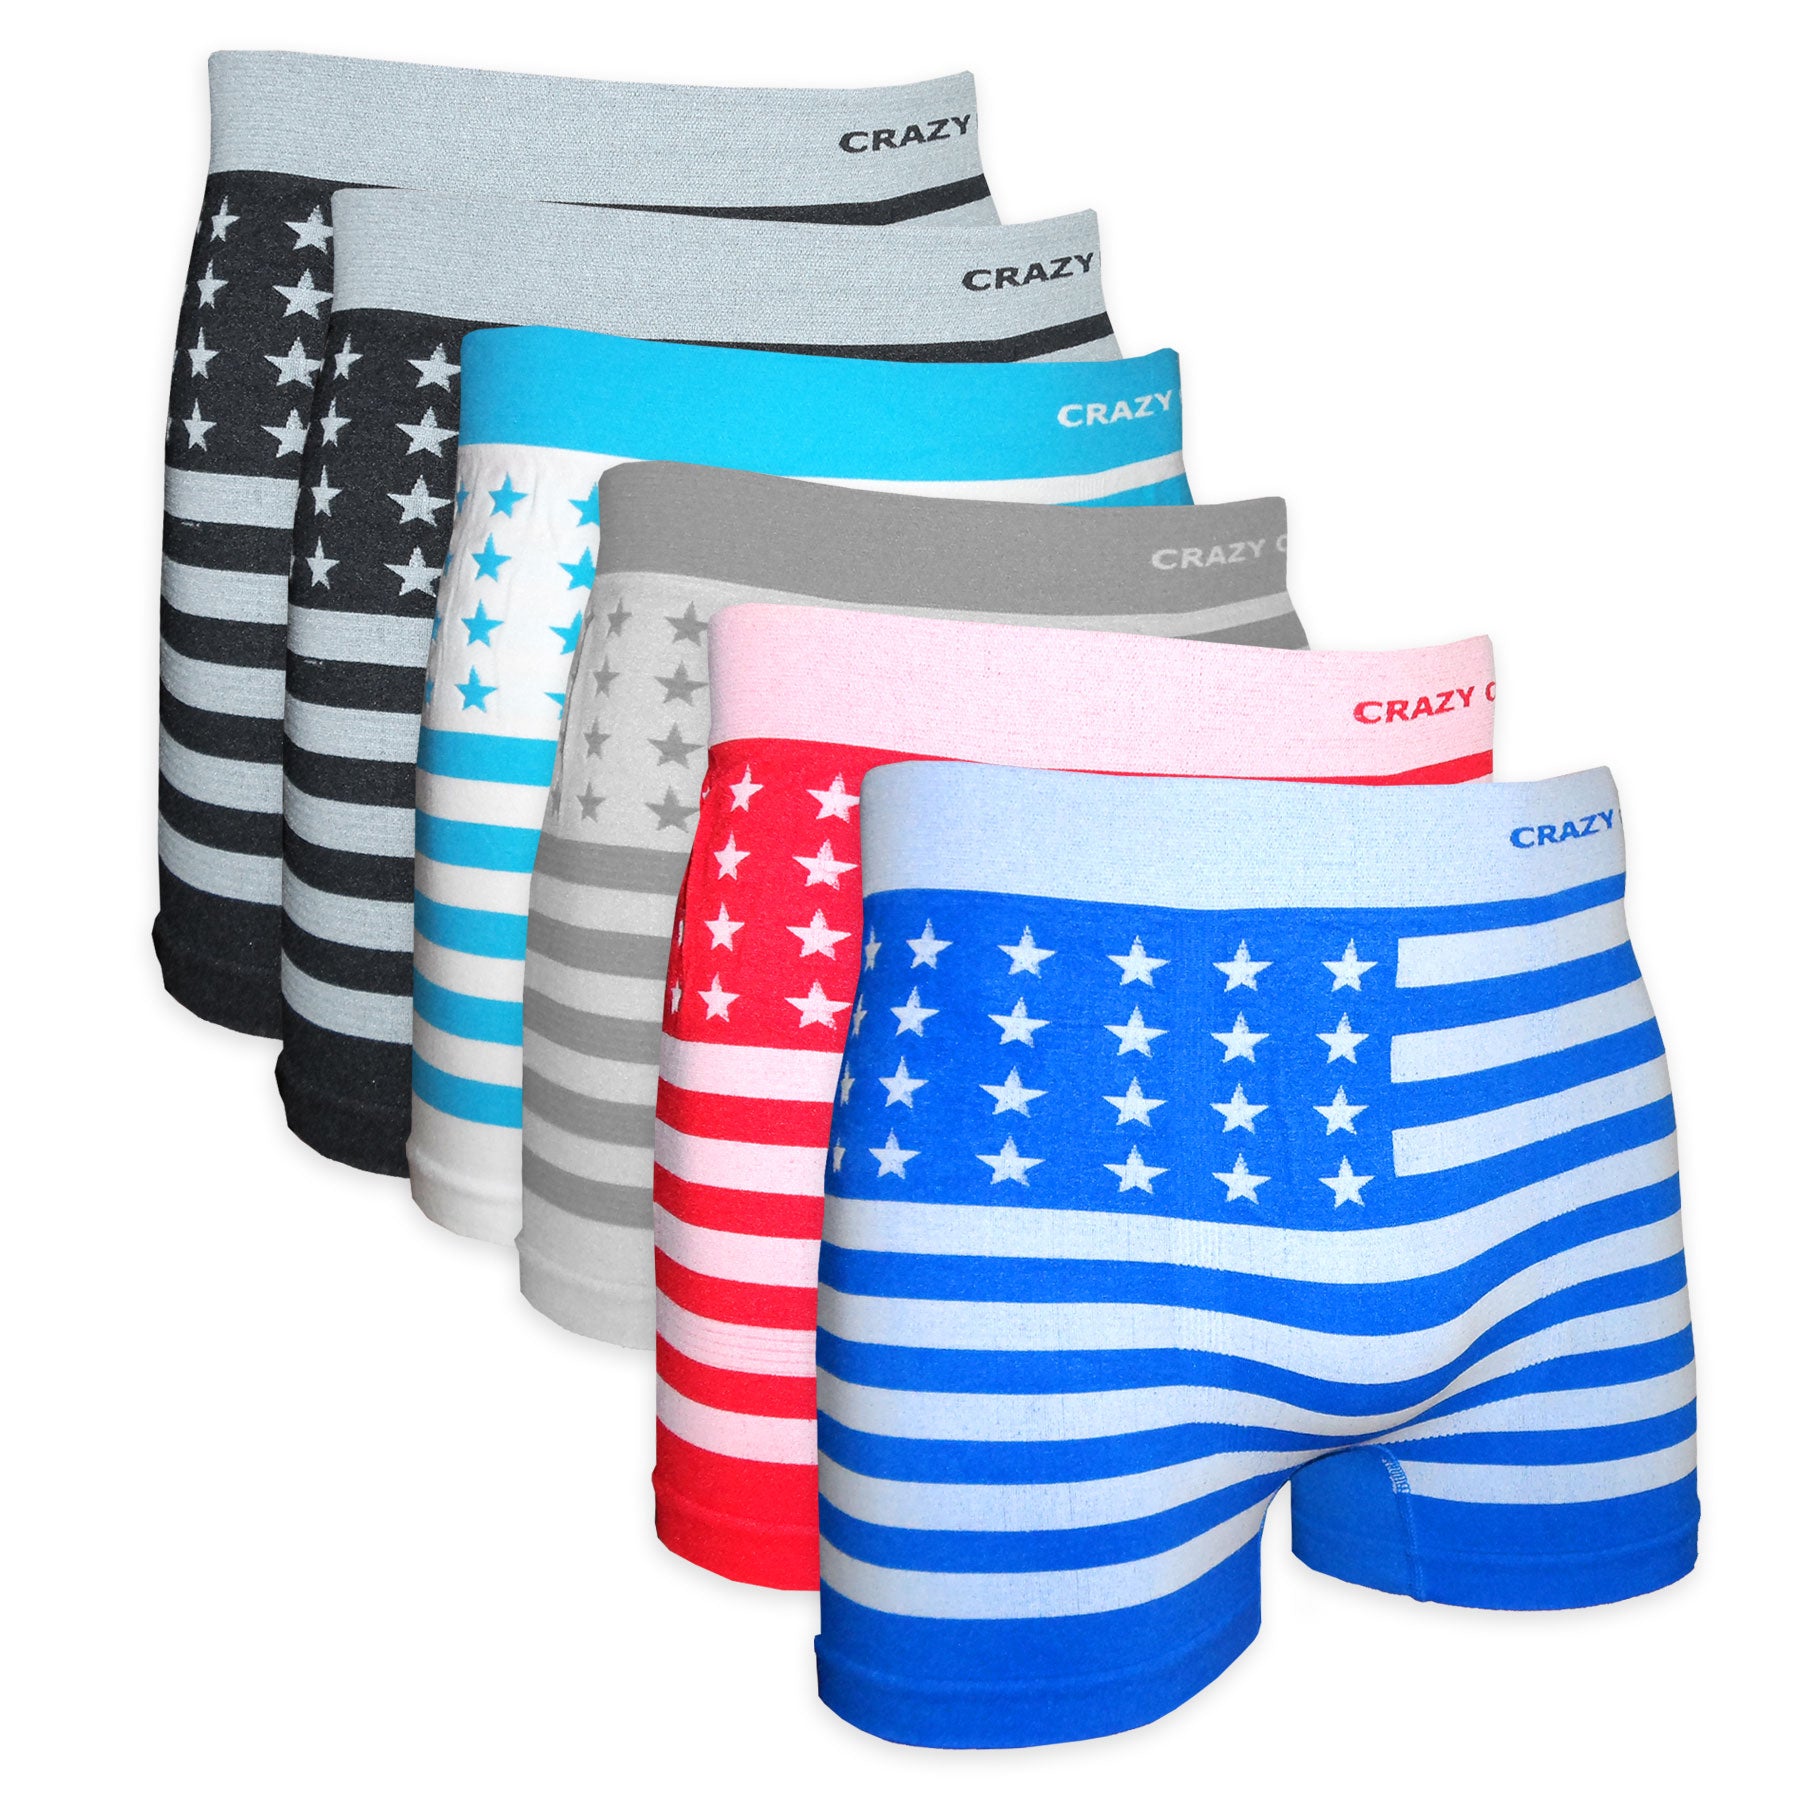 6 Pc Mens Seamless Boxers Briefs Underwear Athletic Underpants